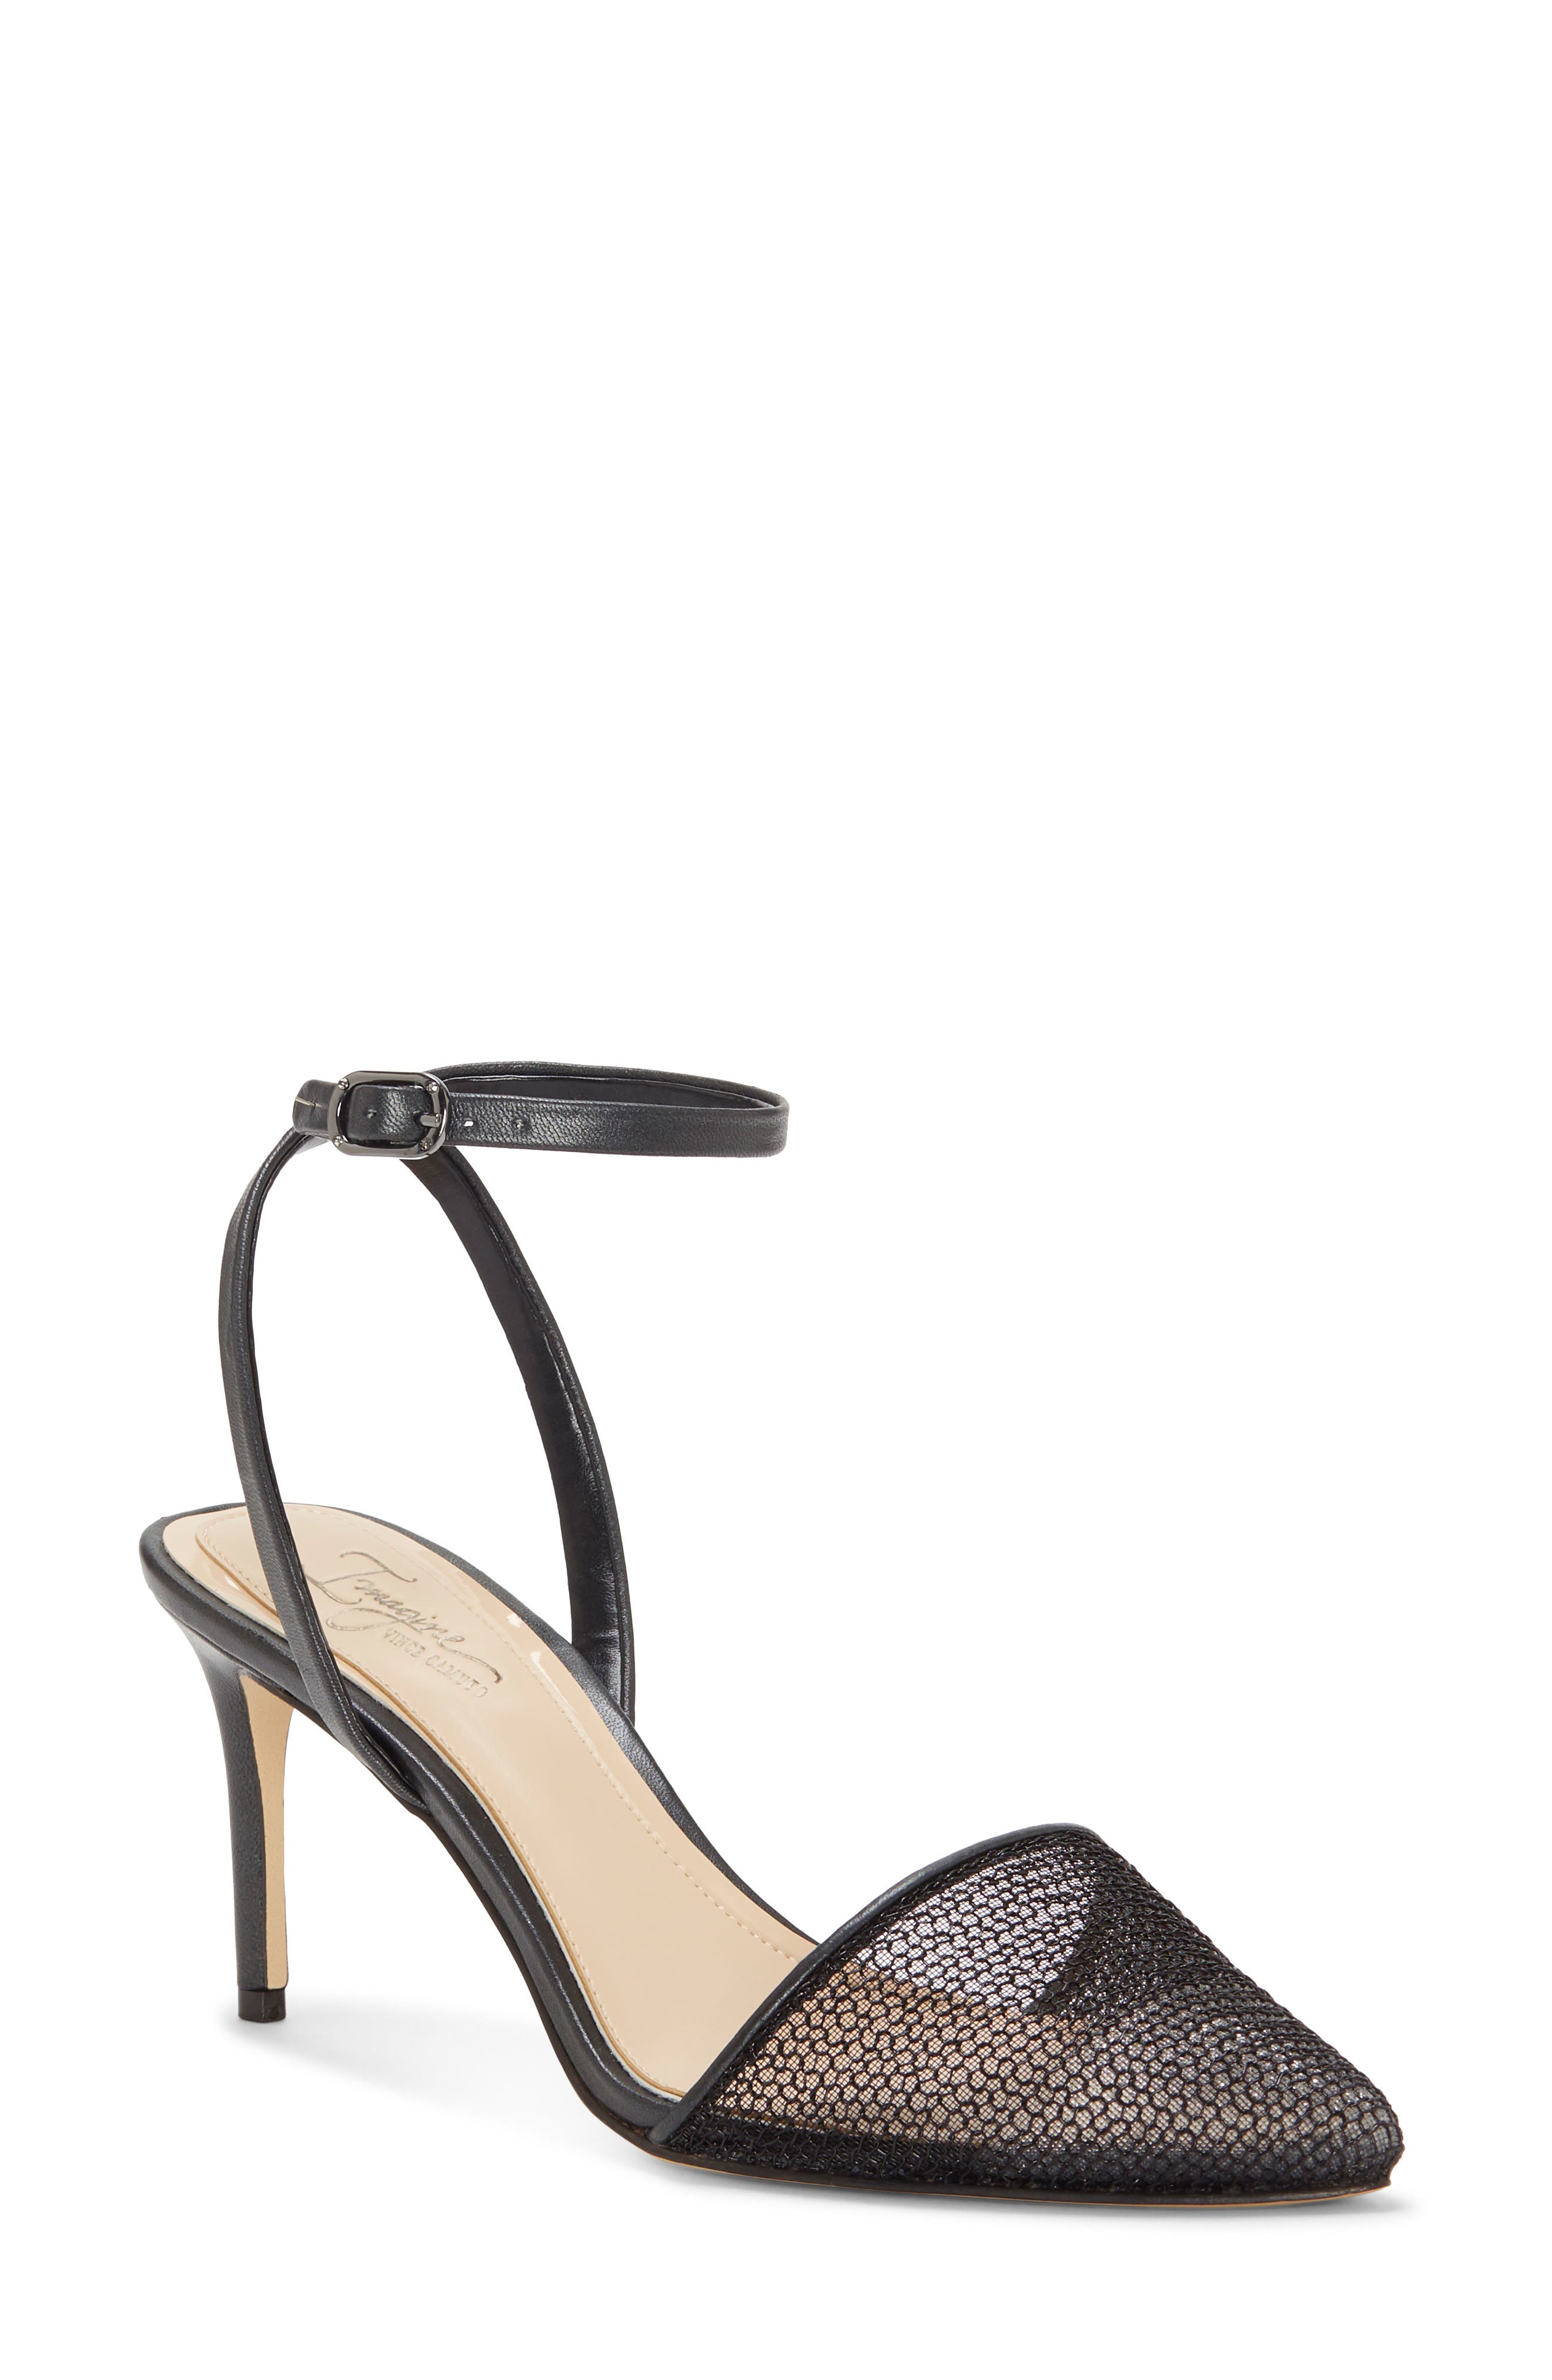 Imagine Vince Camuto Maive Mesh Pointy 